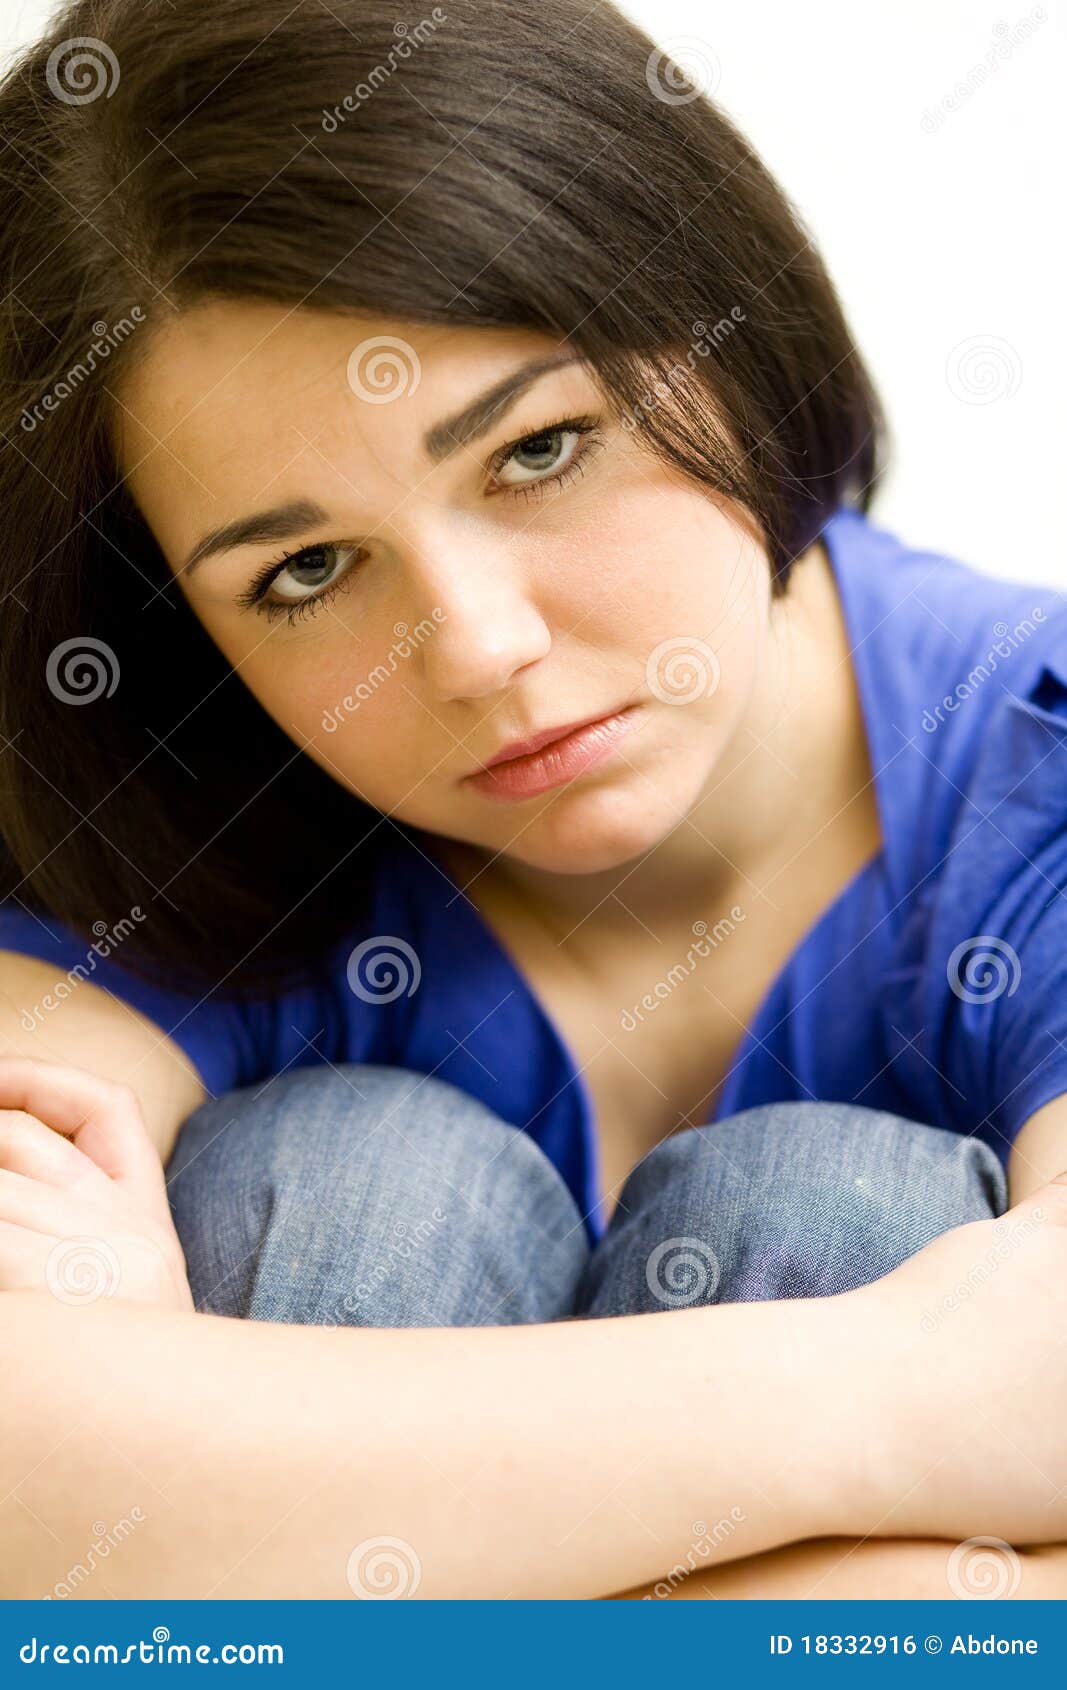 Very sad young girl stock photo. Image of hair, looking - 18332916